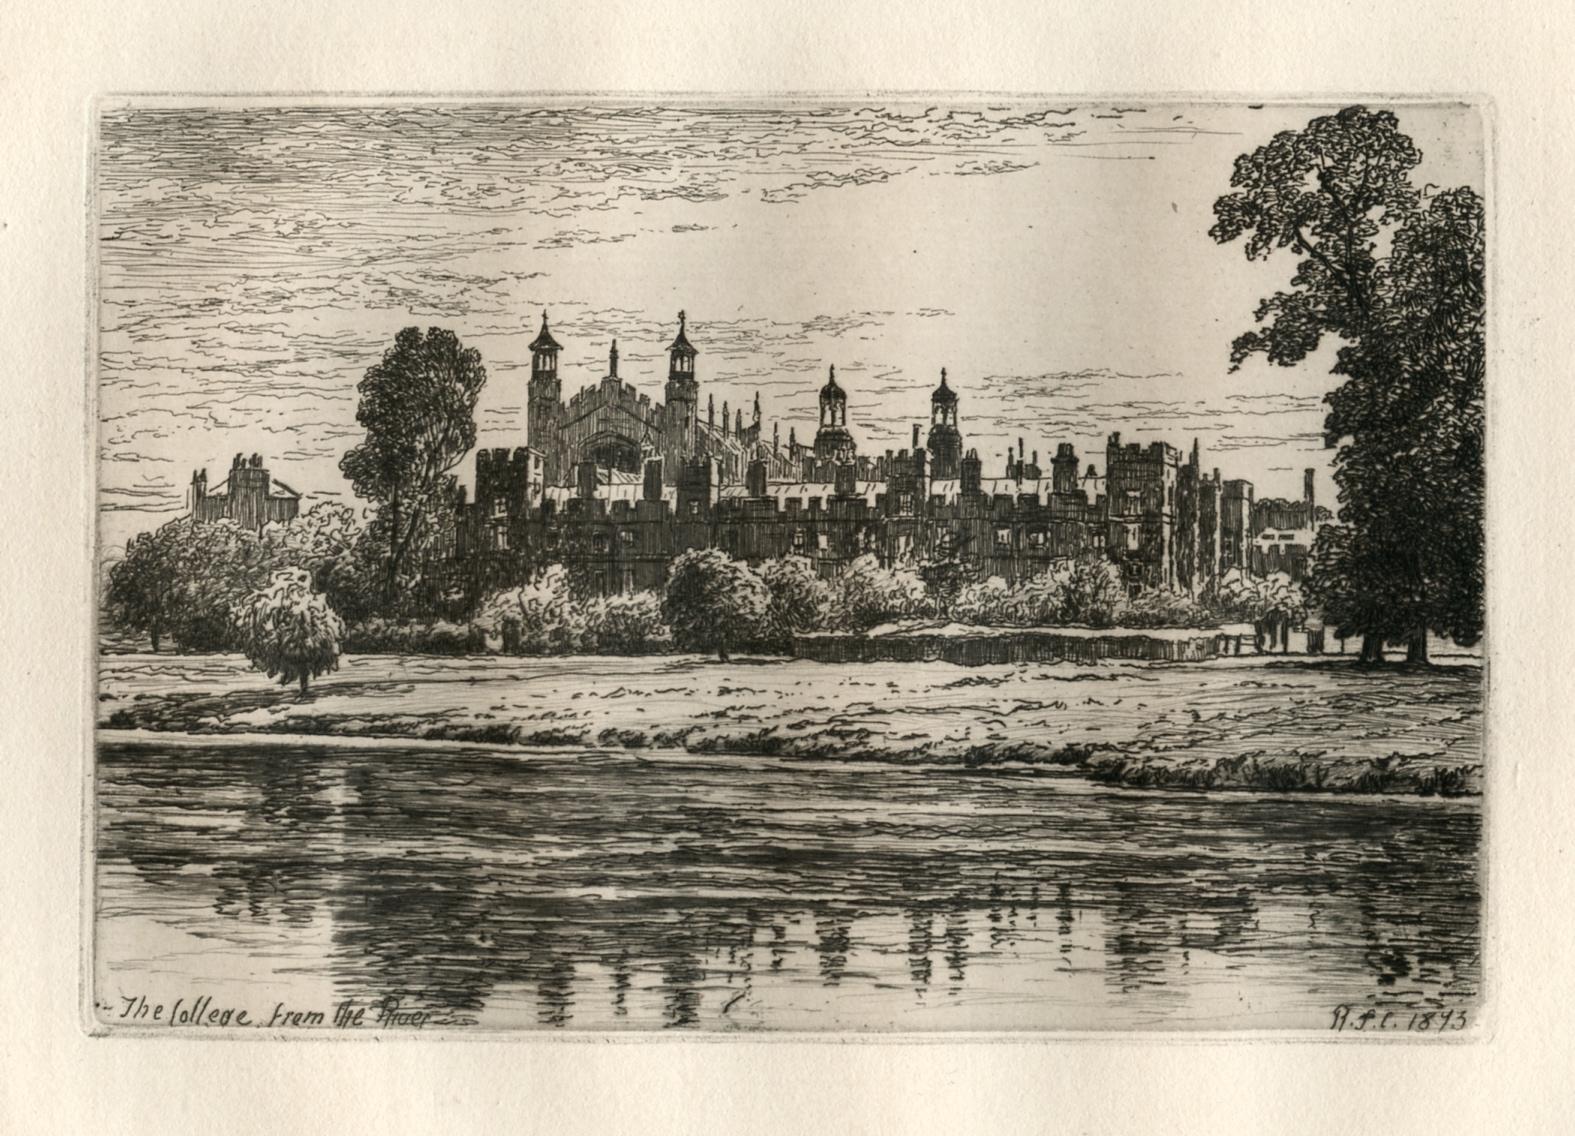 "The College from the River" original etching - Print by Richard Samuel Chattock